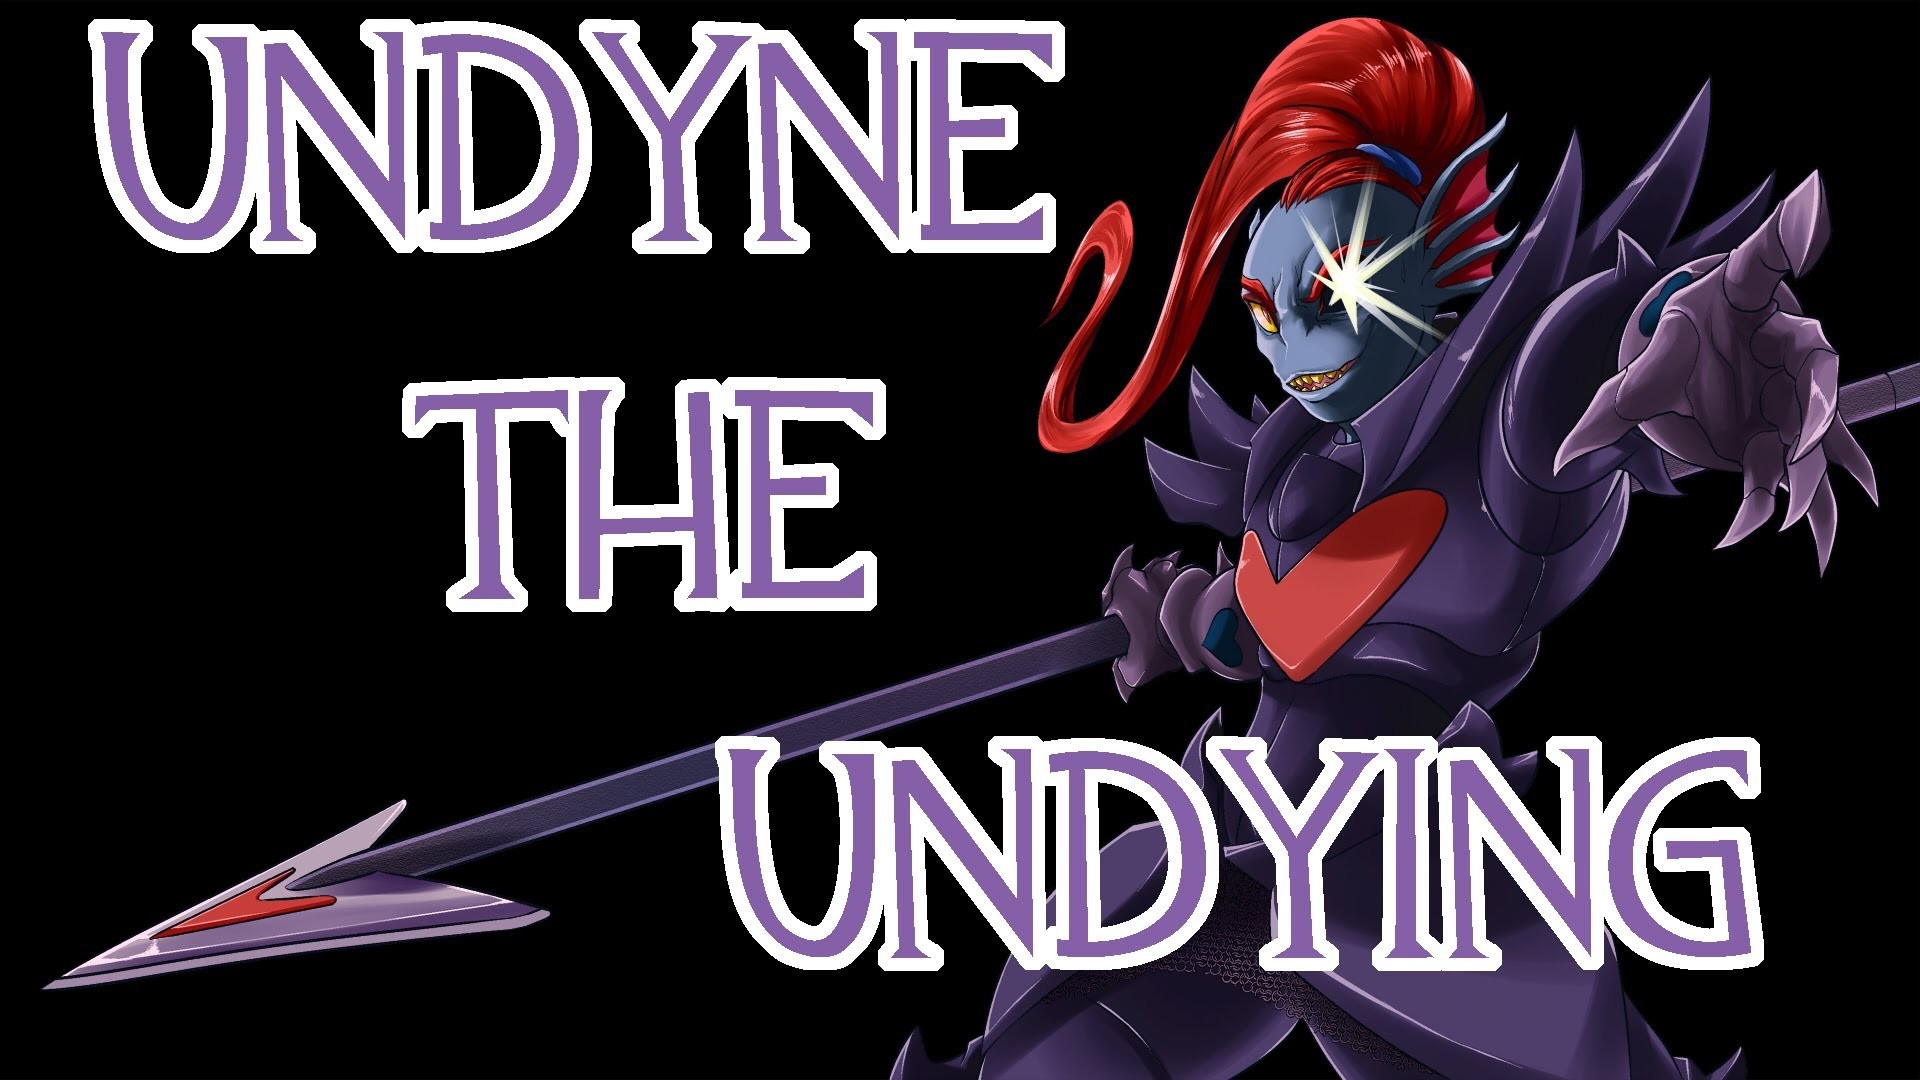 Undertale | Undyne The undying Netrual run